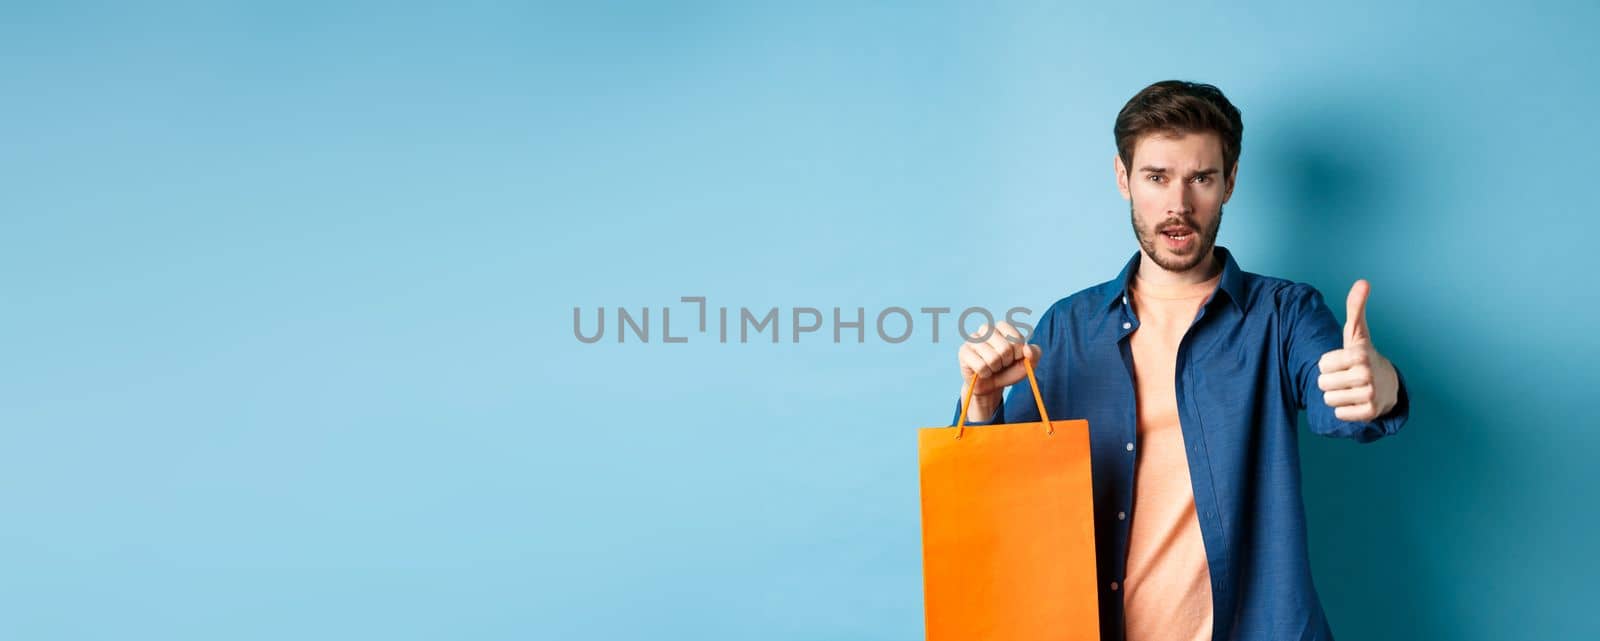 Cool guy showing thumb up and holding orange shopping bag, standing on blue background.